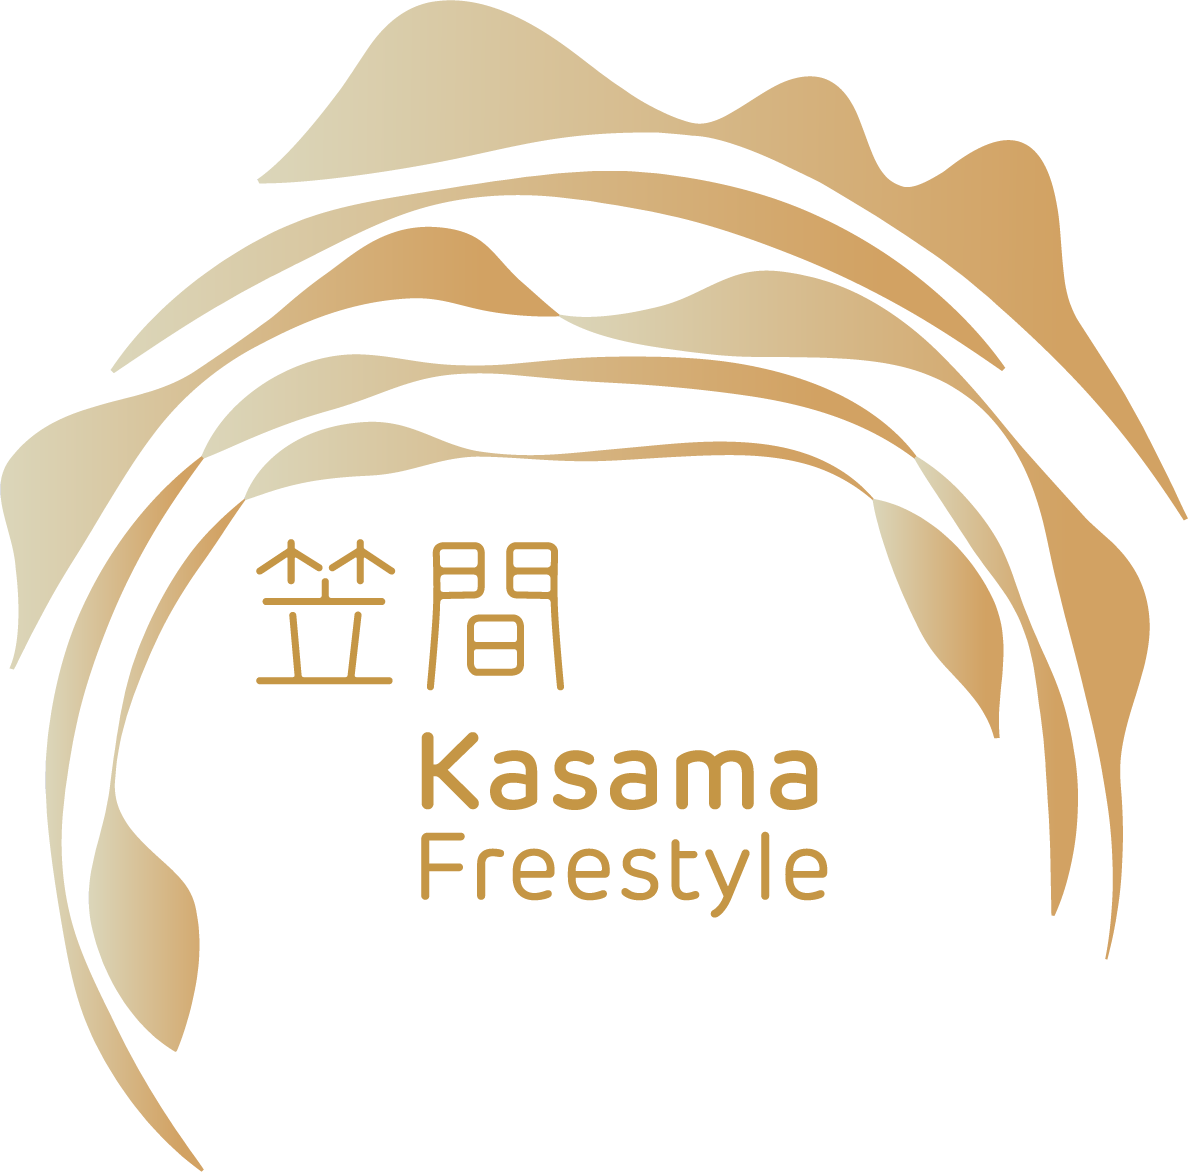 Kasama Freestyle: now at wagumi